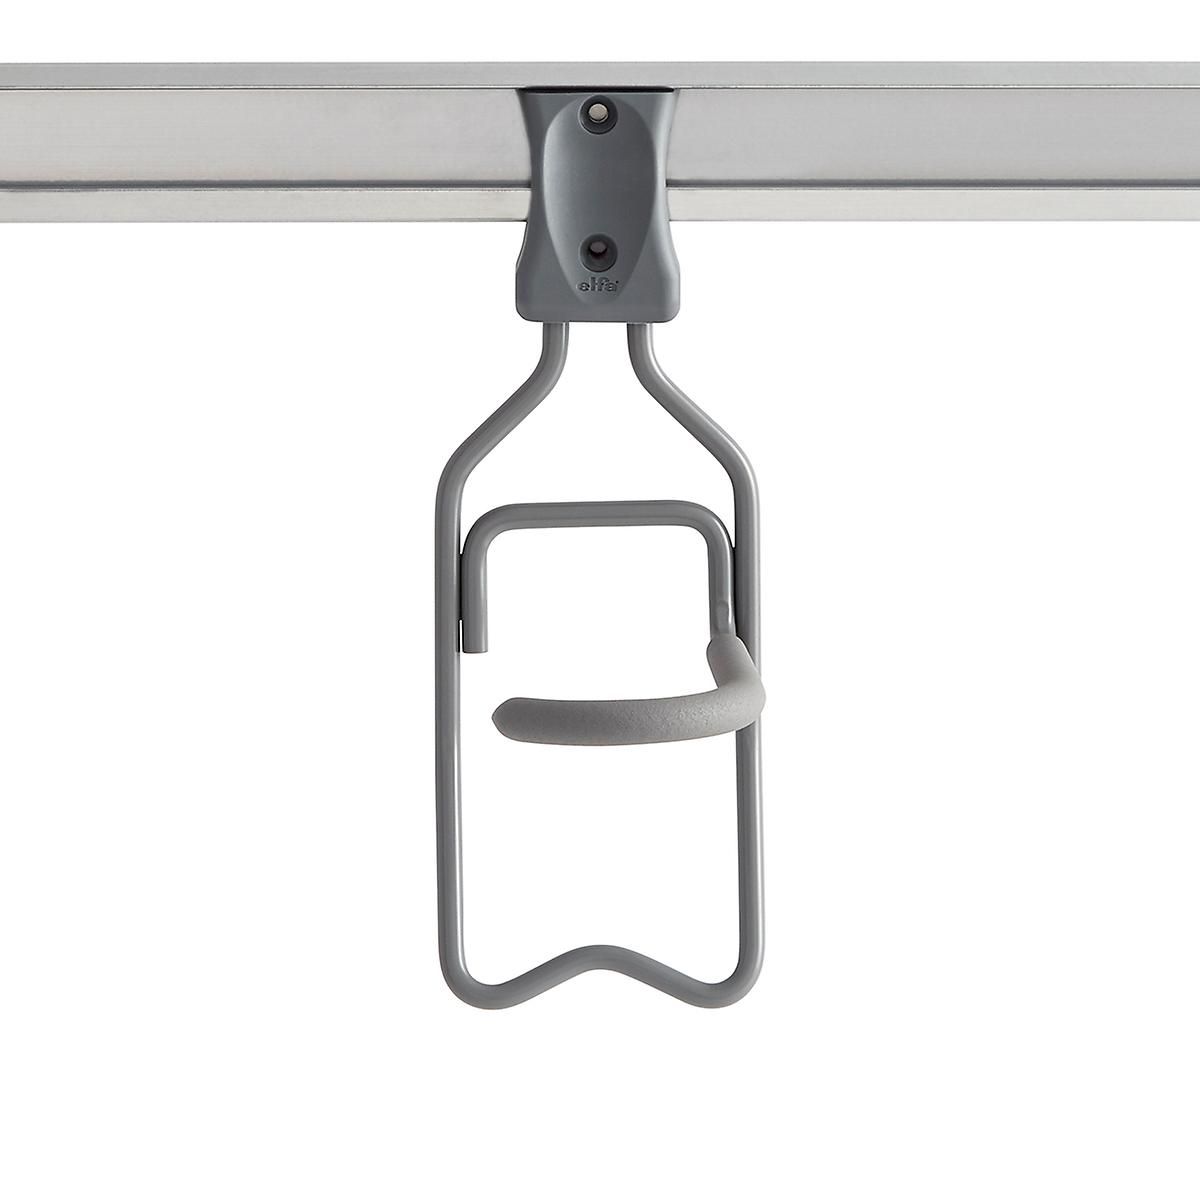 Elfa Utility Vertical Bike Hook | The Container Store